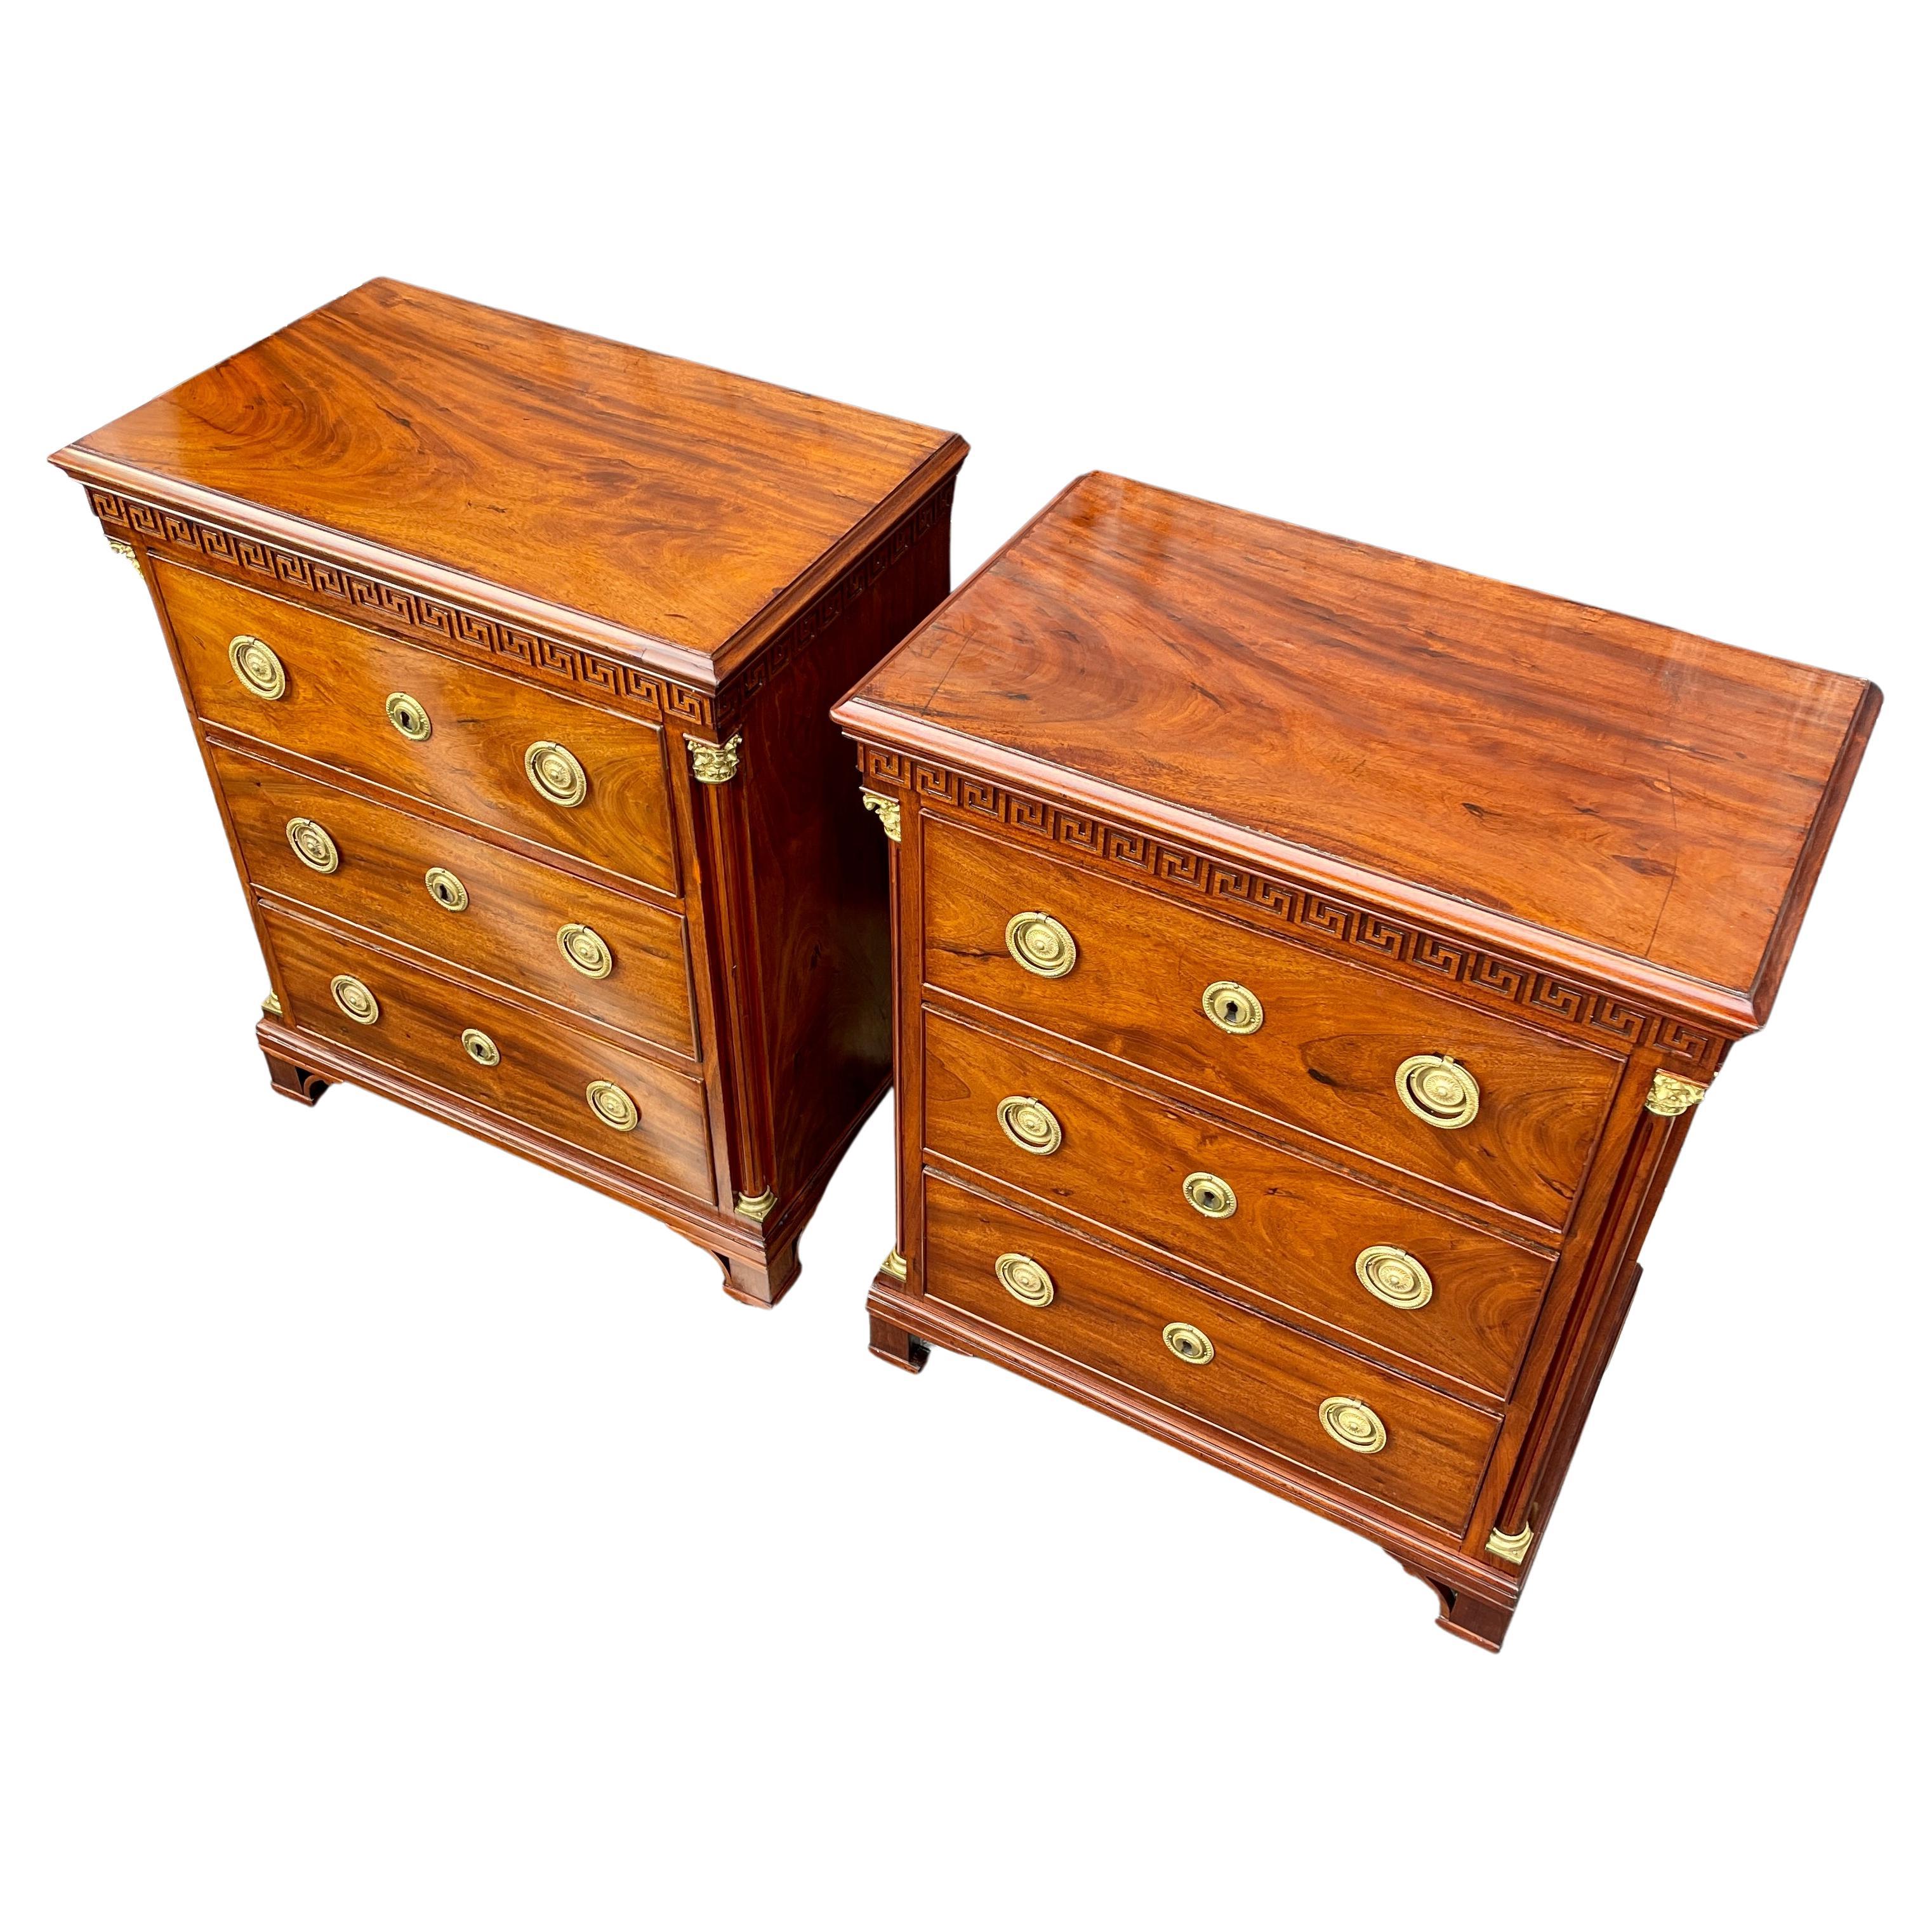 Danish late 18th Century pair of period empire chest of drawers. 
This rare pair was recently found here in the USA, which makes them very attractive because of the new UN/US import restriction of rare and protected wood sorts. More to the point, it